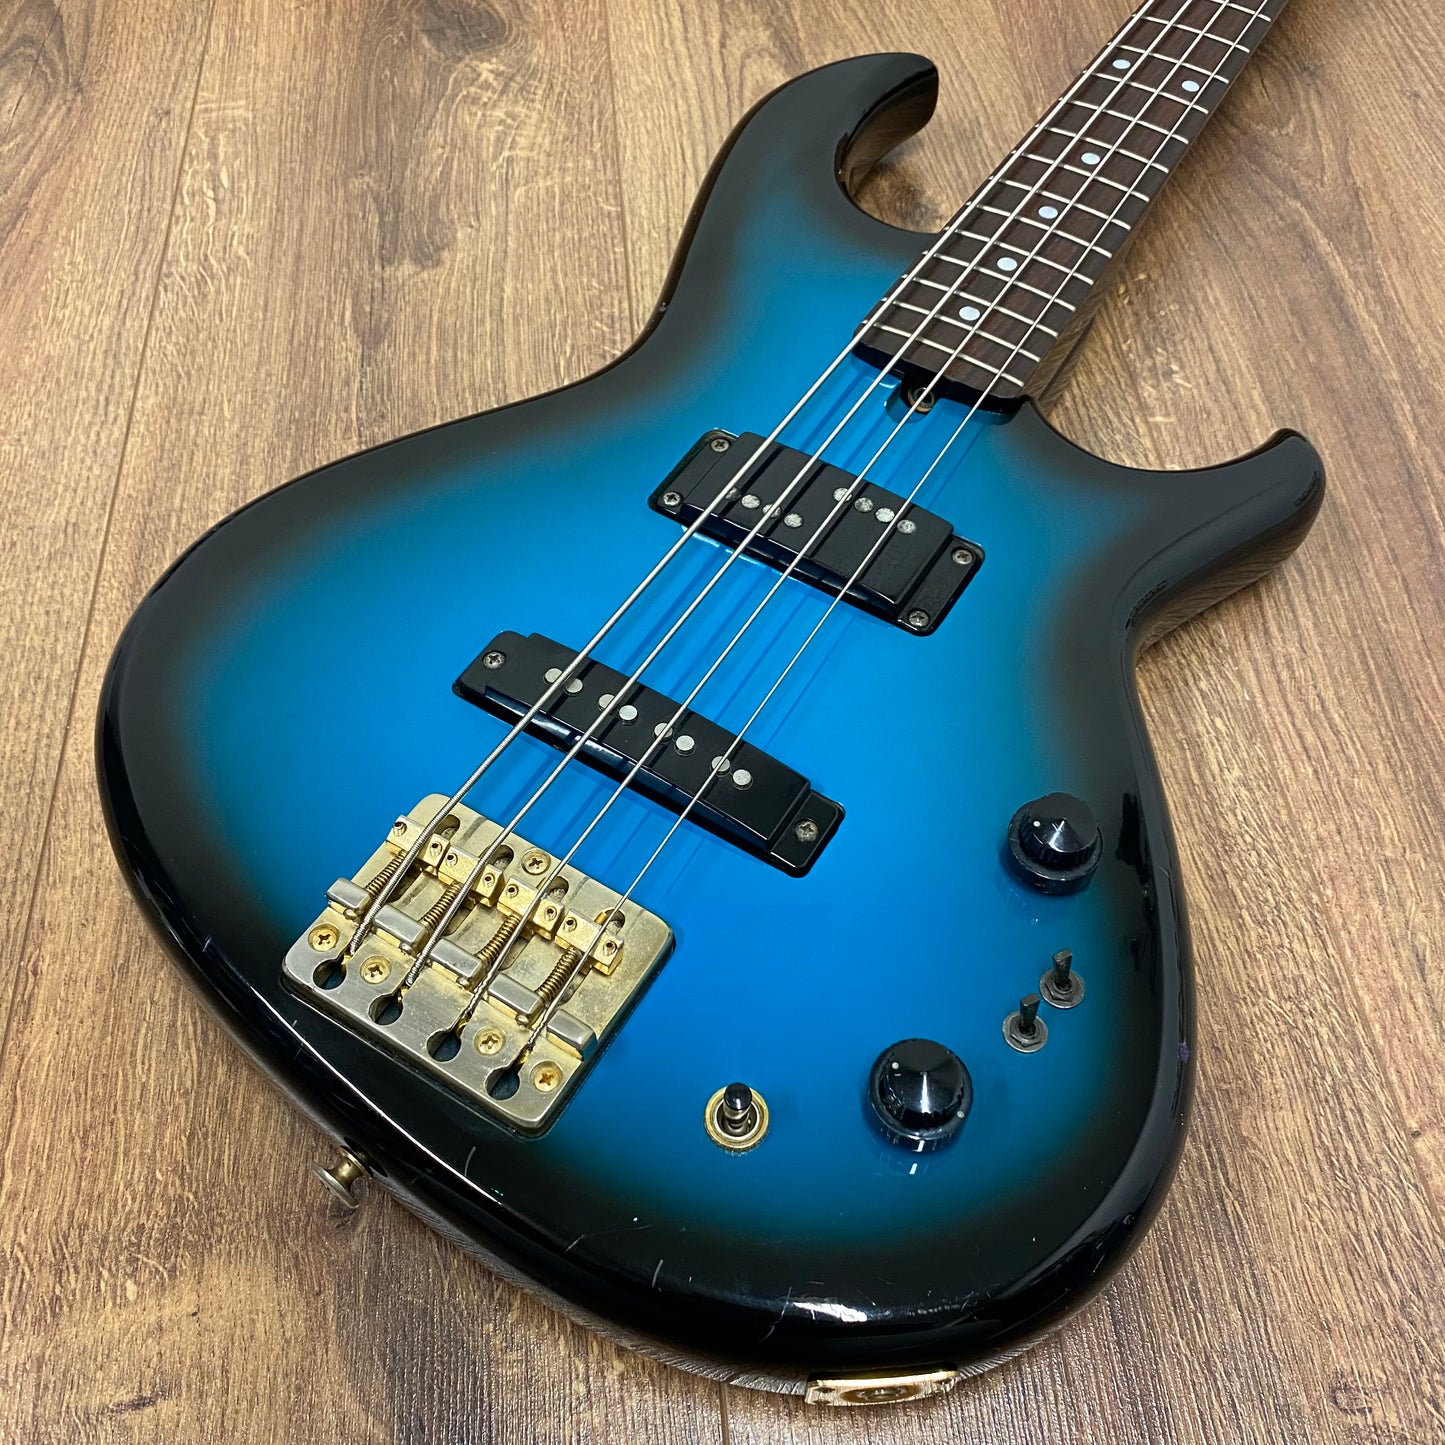 Pre-Owned Aria Pro II RSB Deluxe II - Blue Burst - 1984